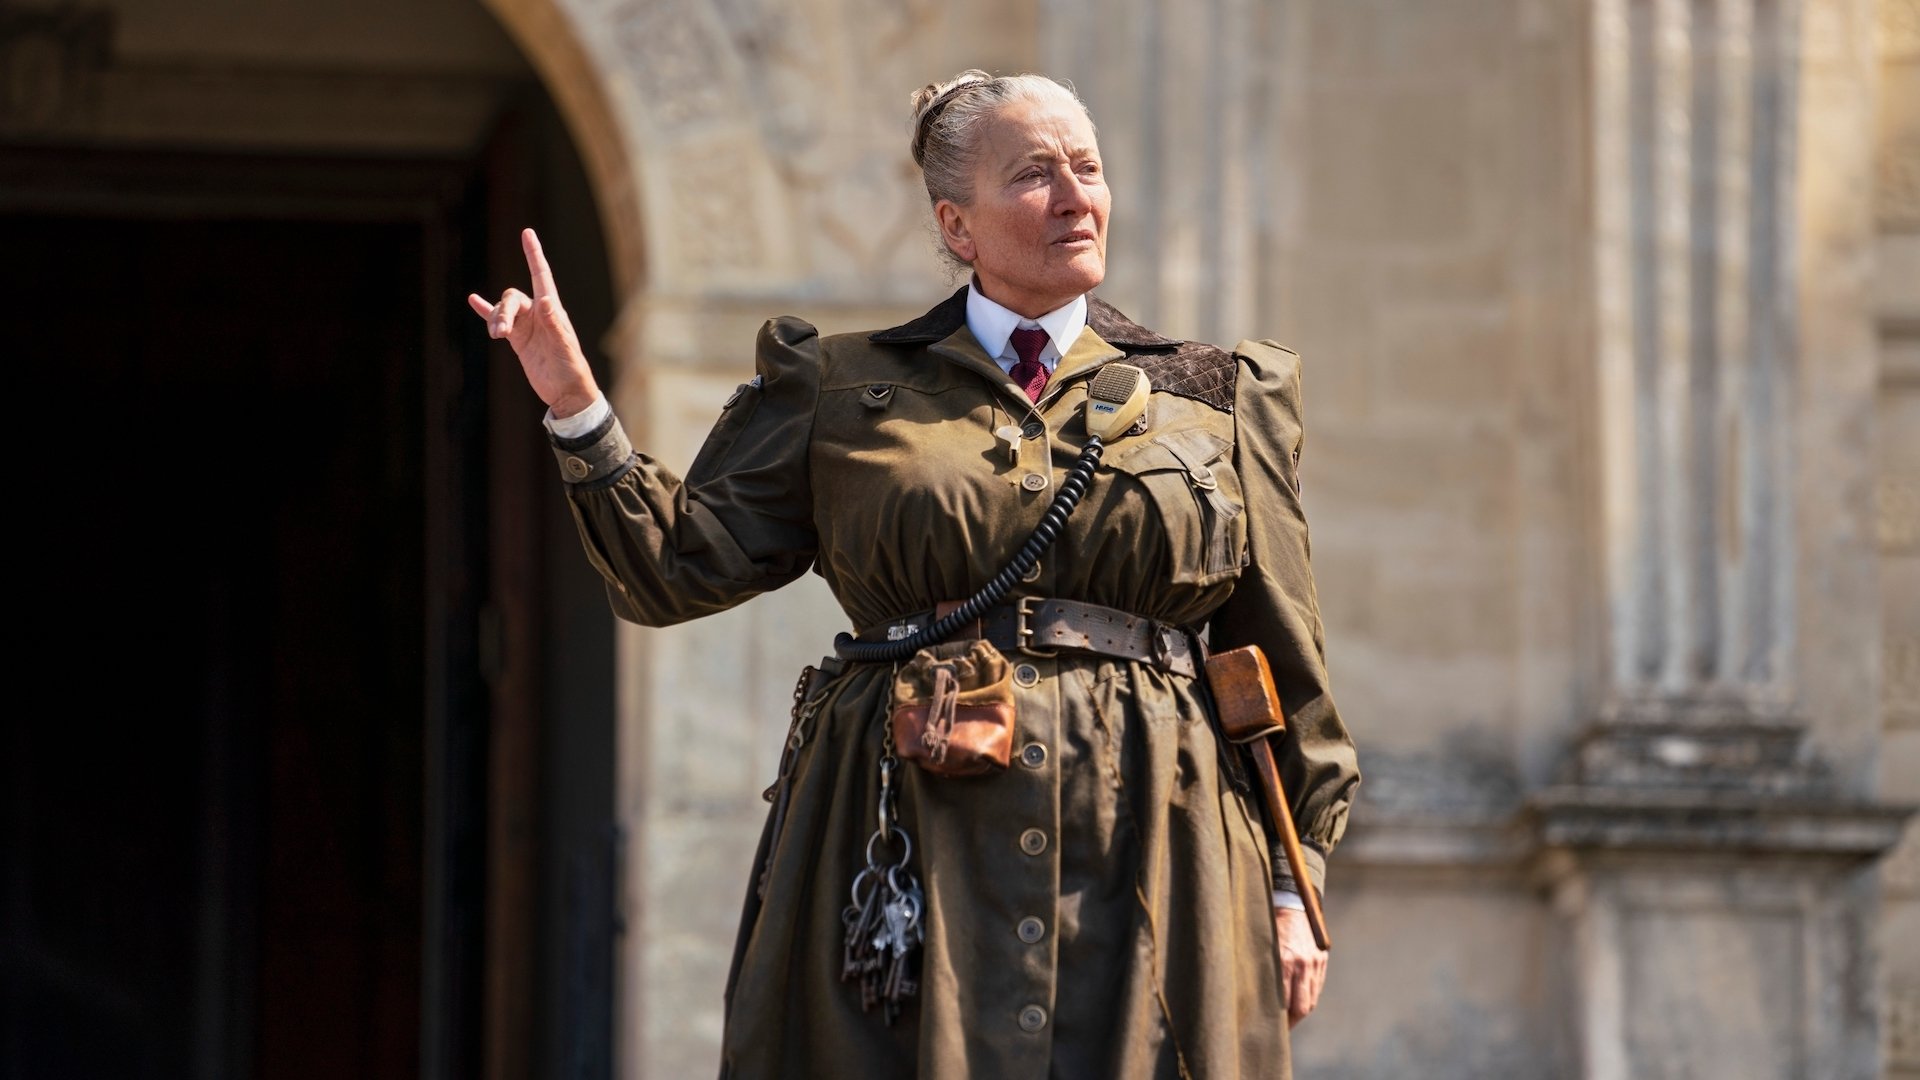 Emma Thompson dressed as the character Miss Trunchbull.